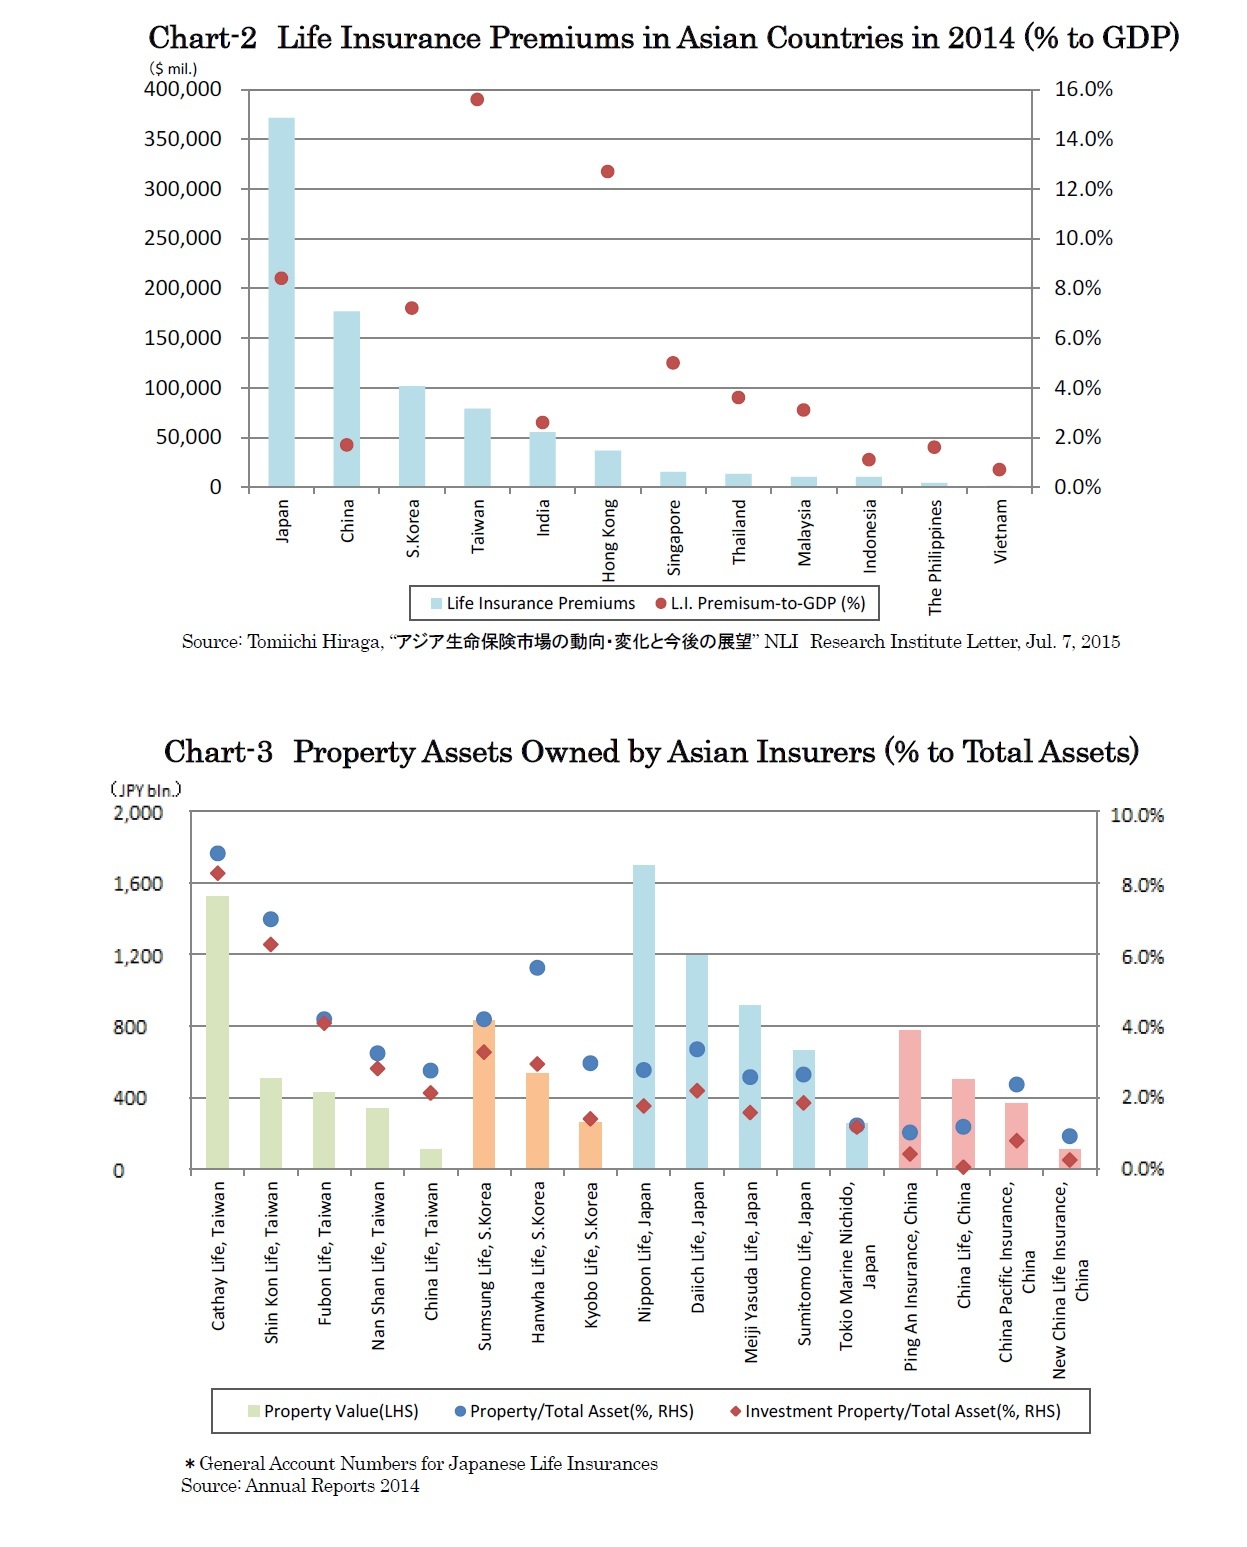 Chart-2　Life Insurance Premiums in Asian Countries (% to GDP)/Chart-3　Property Assets Owned by Asian Insurers (% to Total Assets)